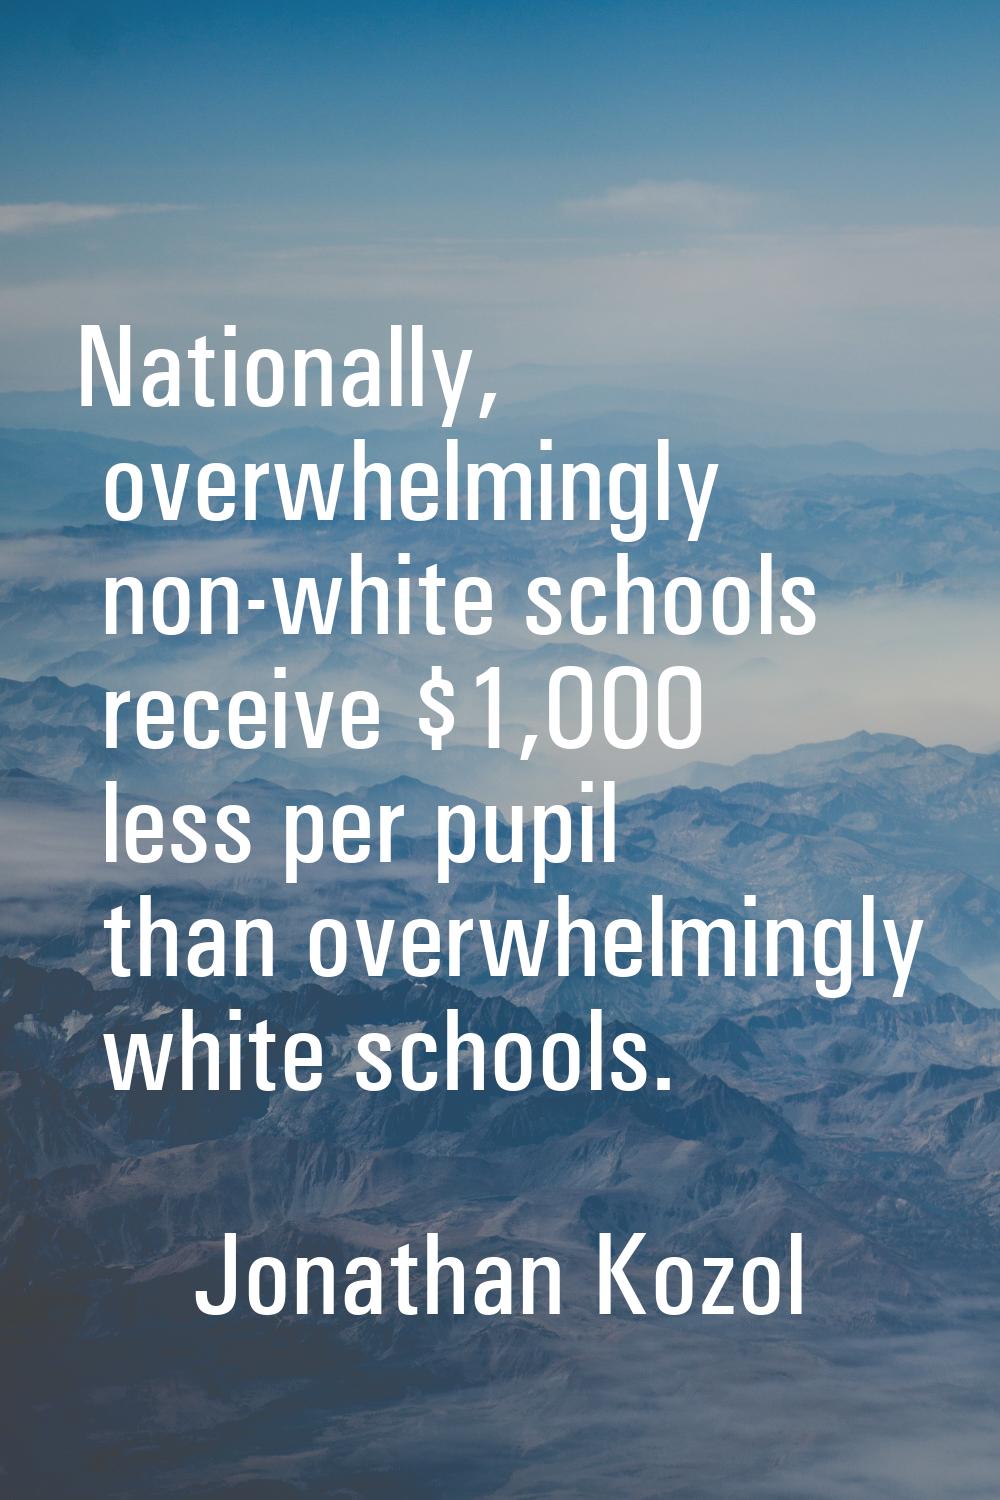 Nationally, overwhelmingly non-white schools receive $1,000 less per pupil than overwhelmingly whit